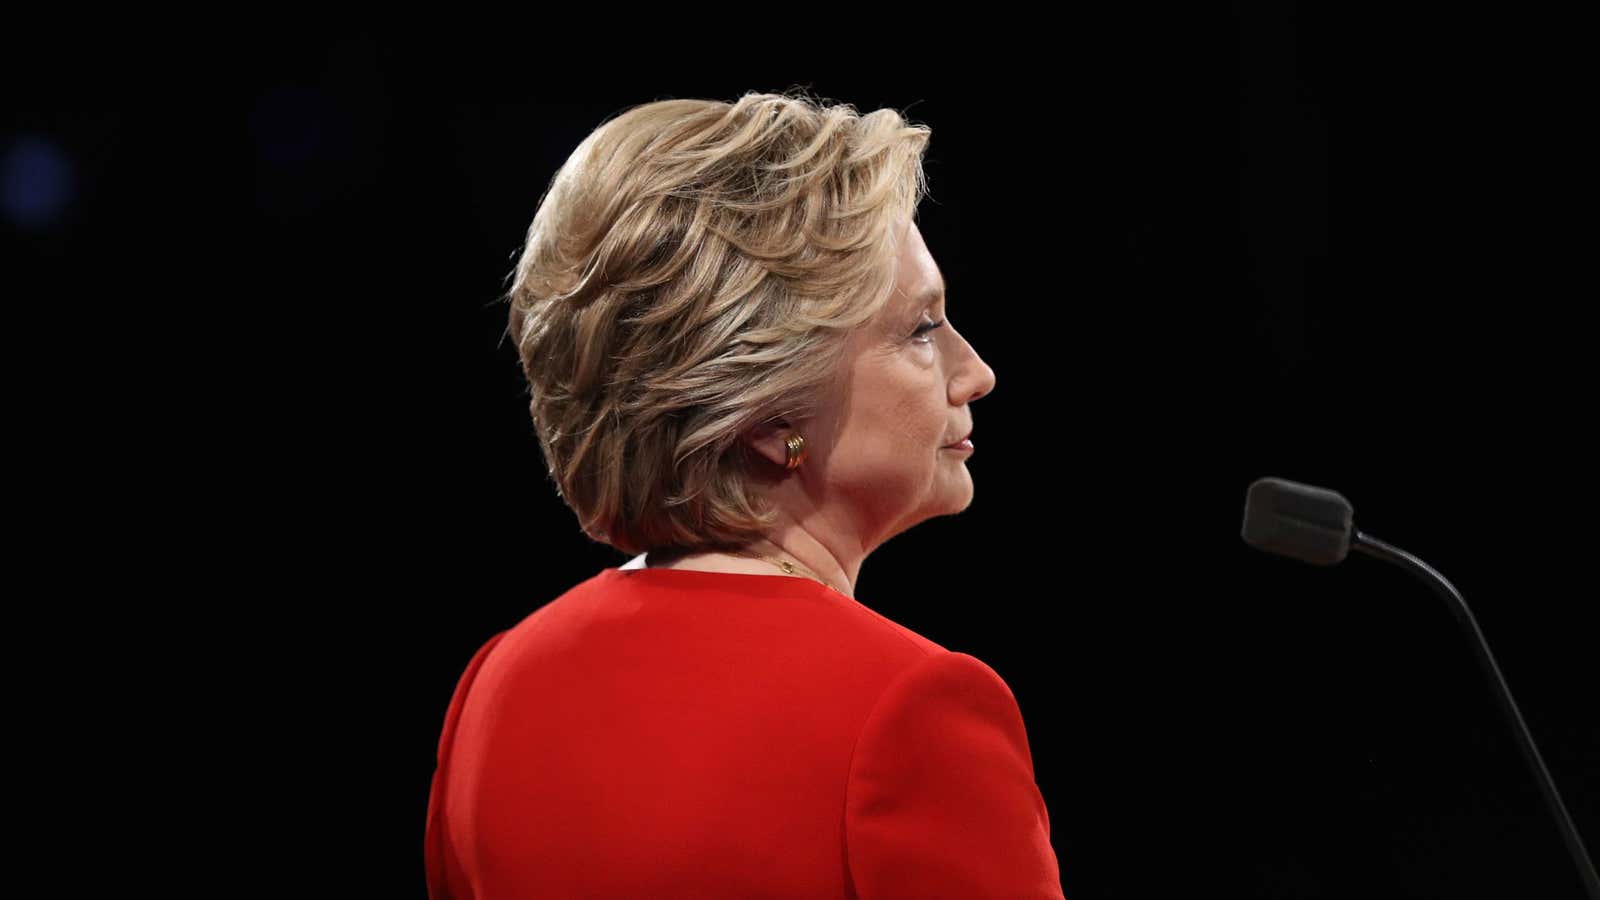 Hillary Clinton during the first presidential debate in September 2016.